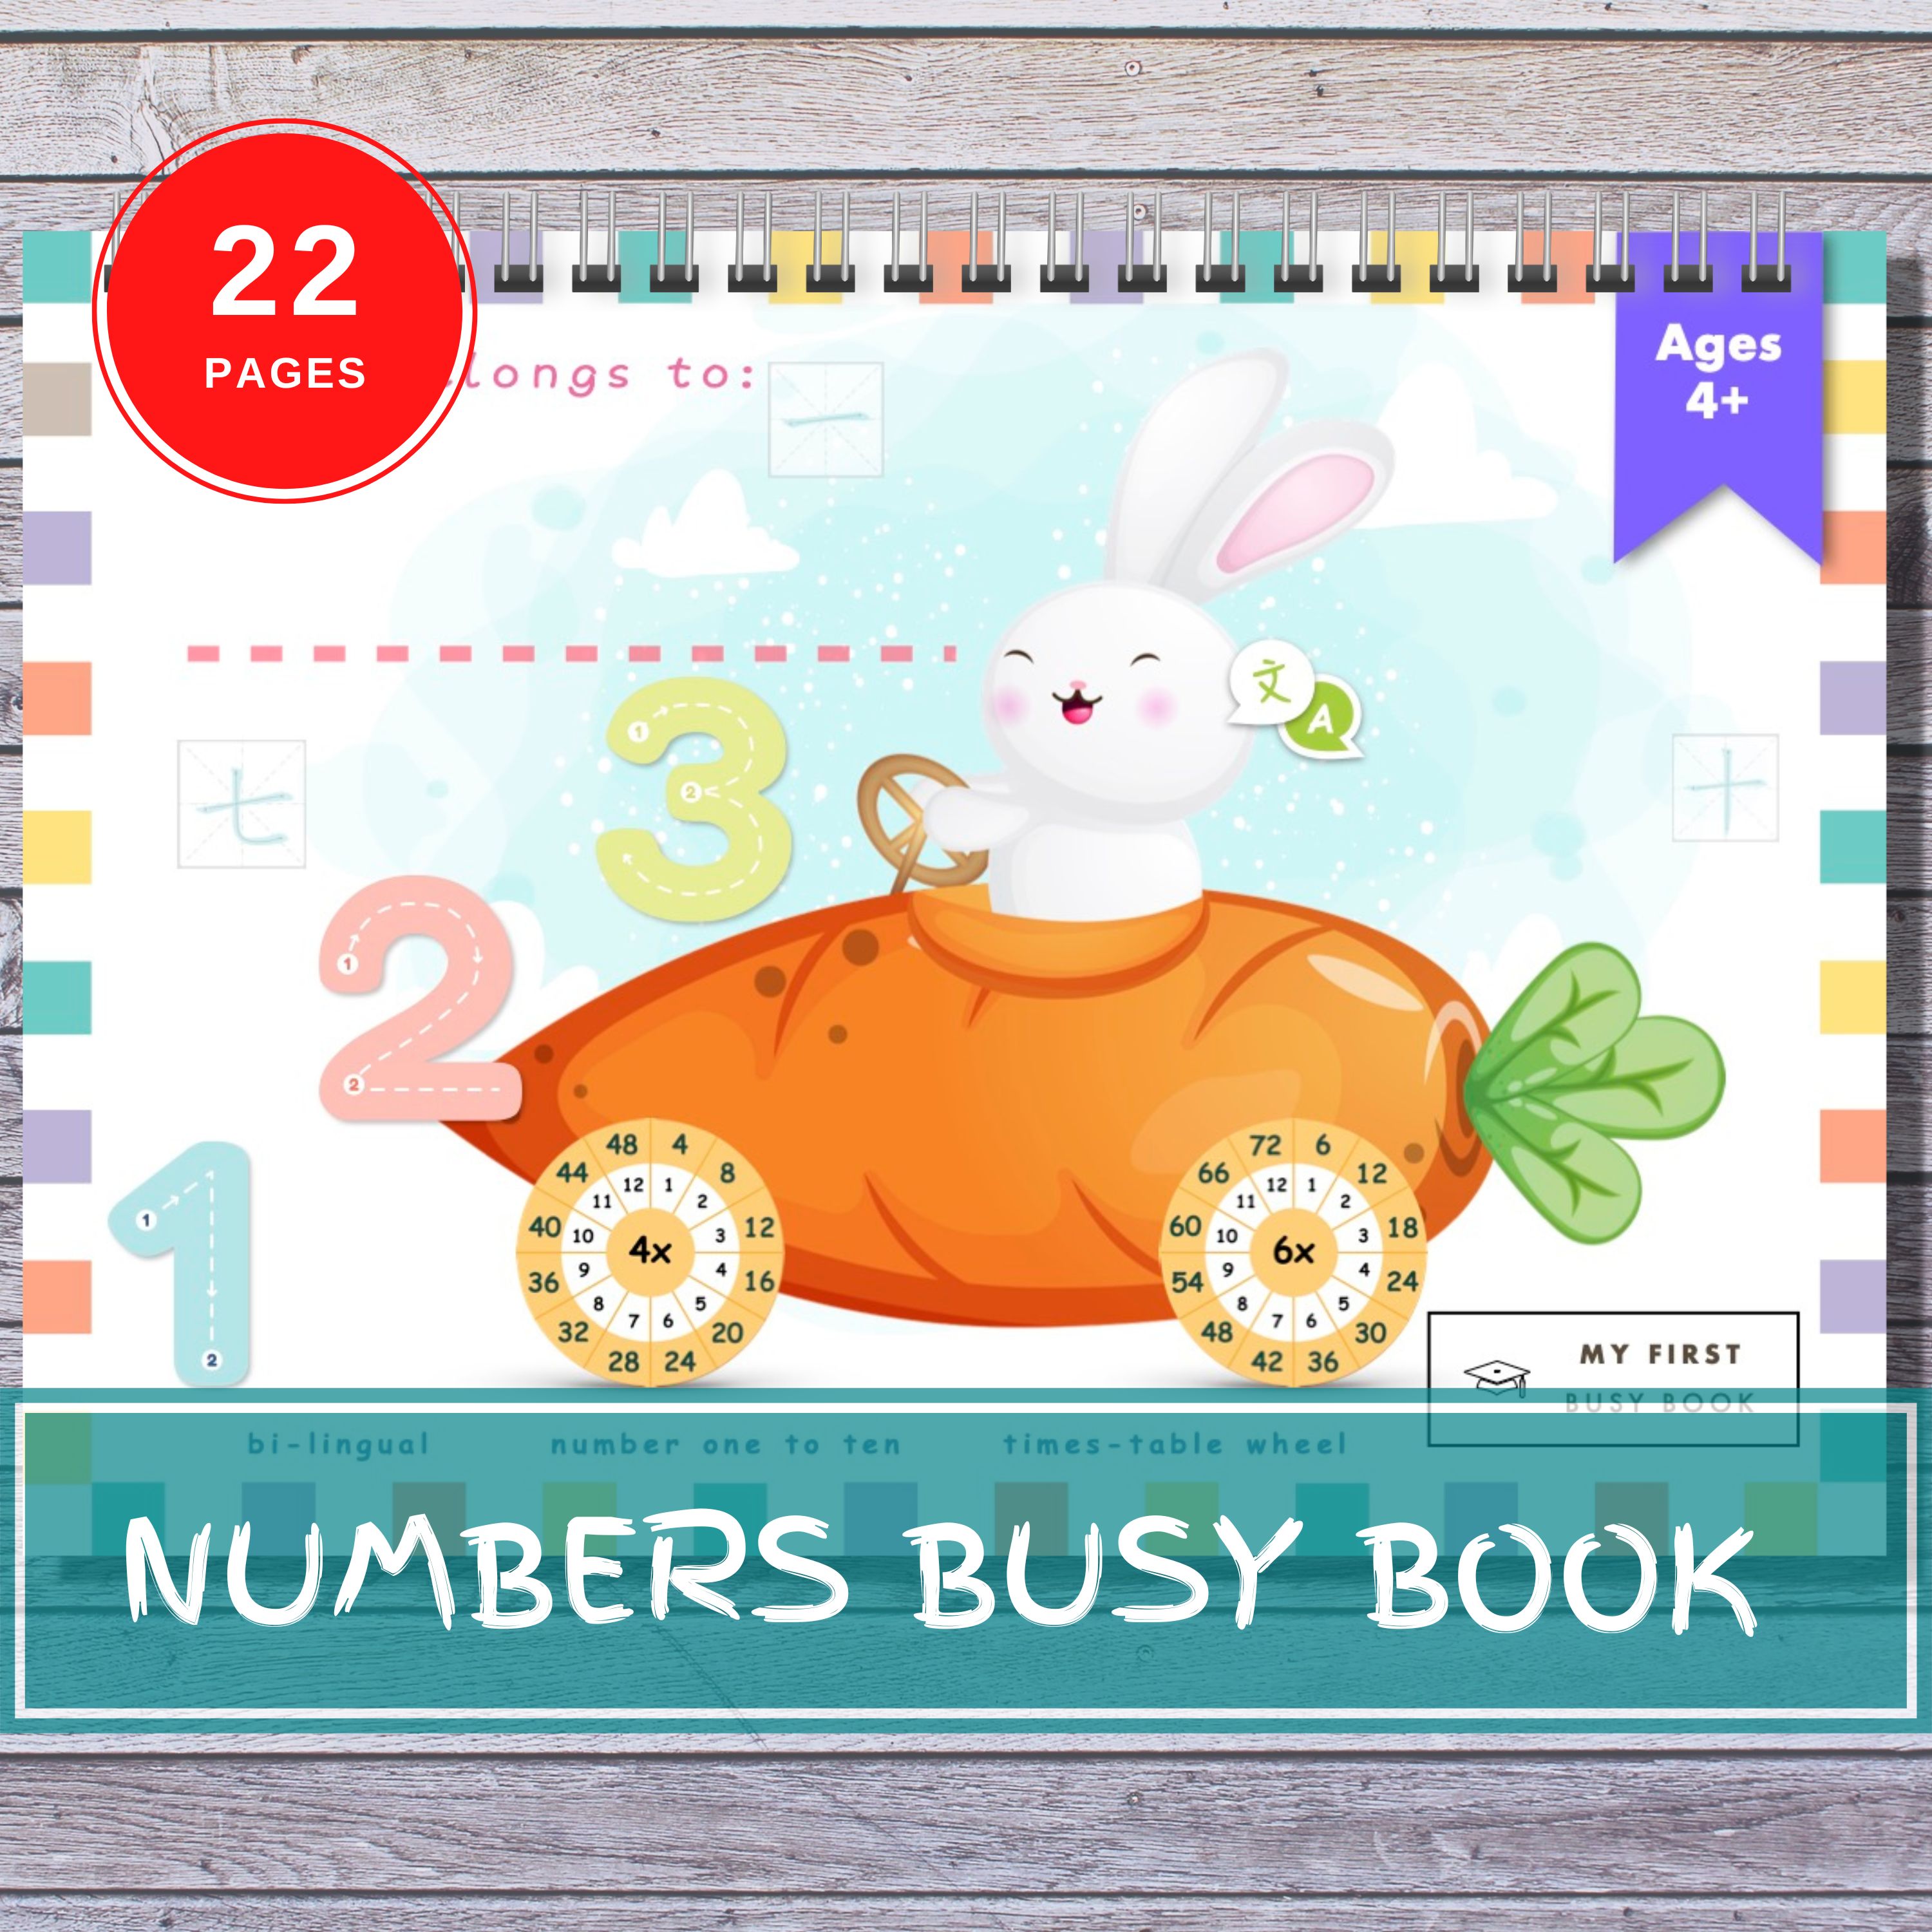 My First 123 Number Bilingual English Chinese Timestable Wheel Busy Book Activity Early Learning 4 years old page cover